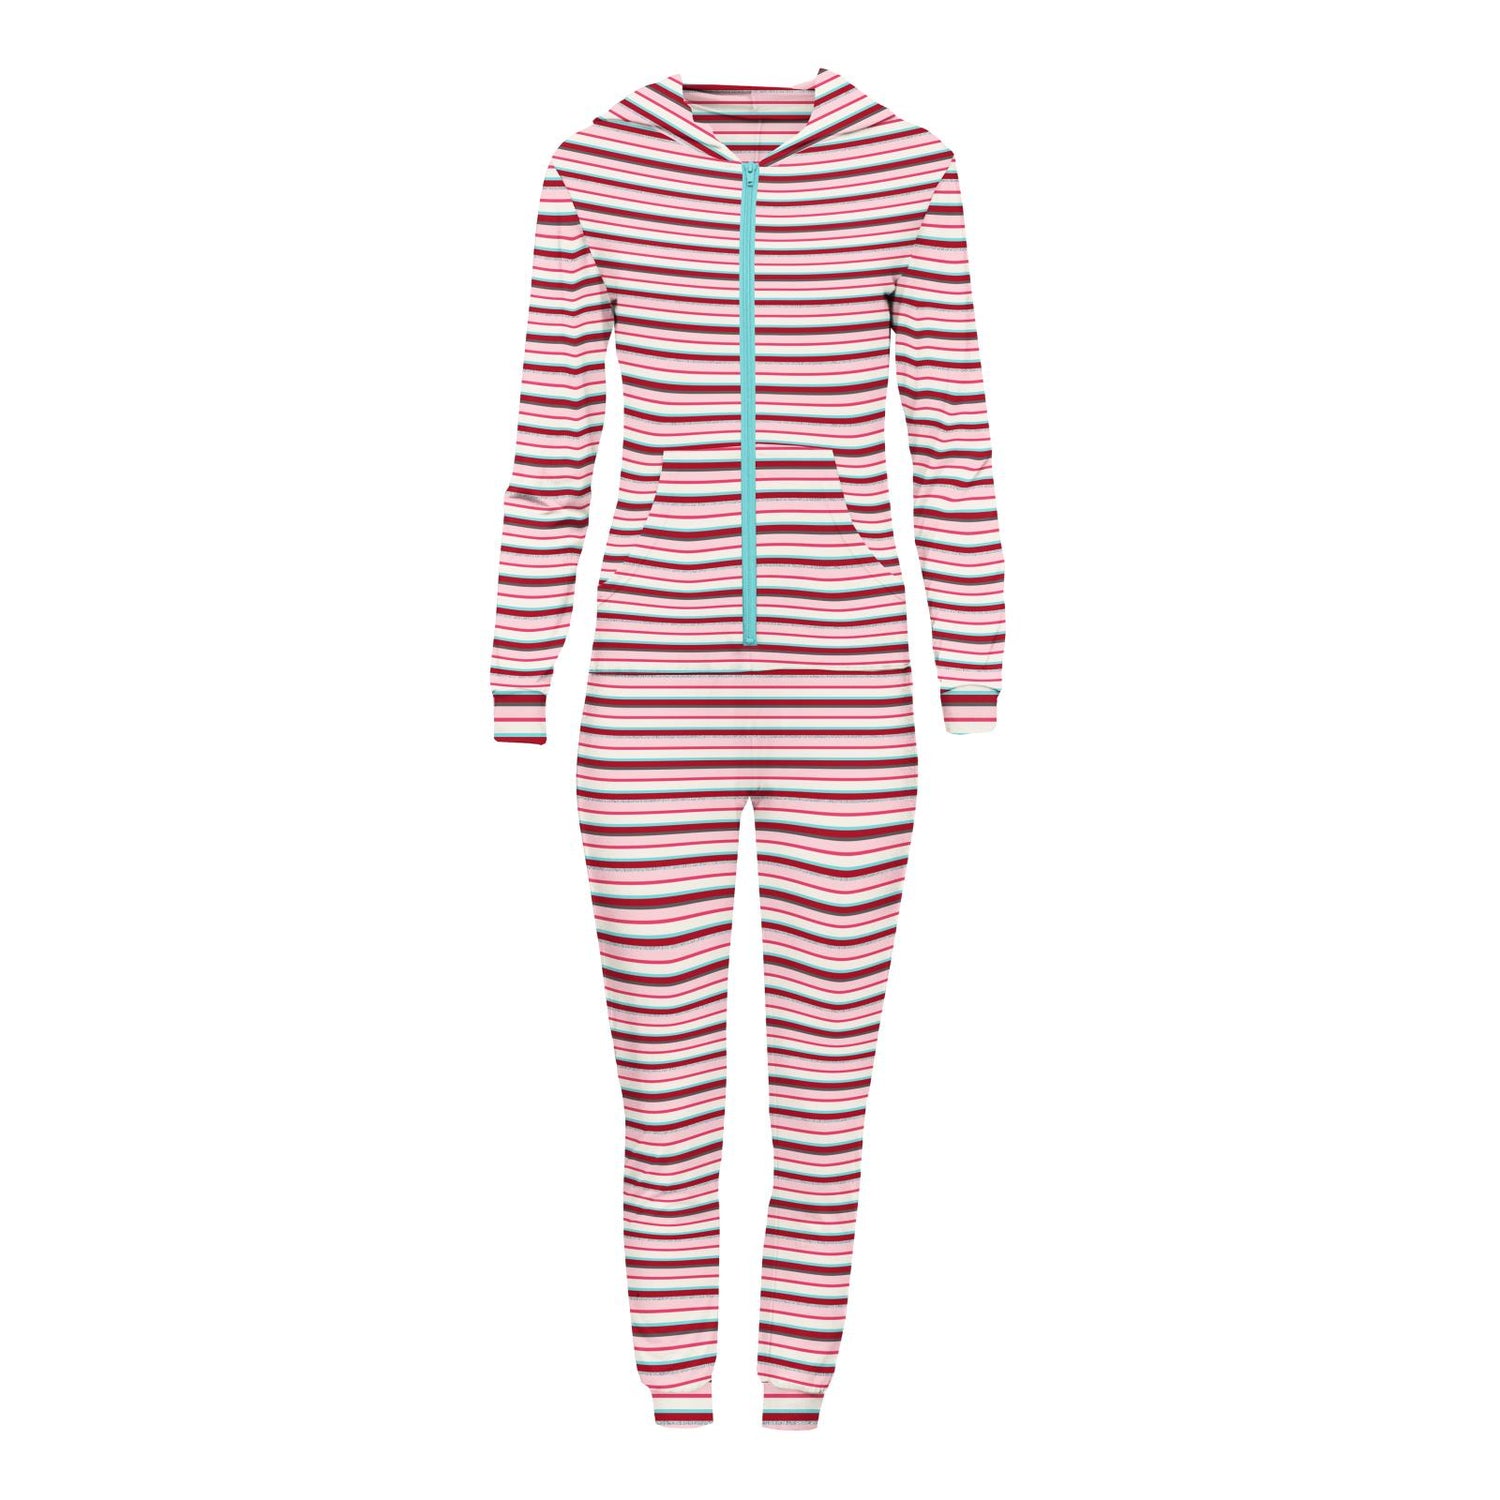 Women's Print Long Sleeve Jumpsuit with Hood in Anniversary Bobsled Stripe